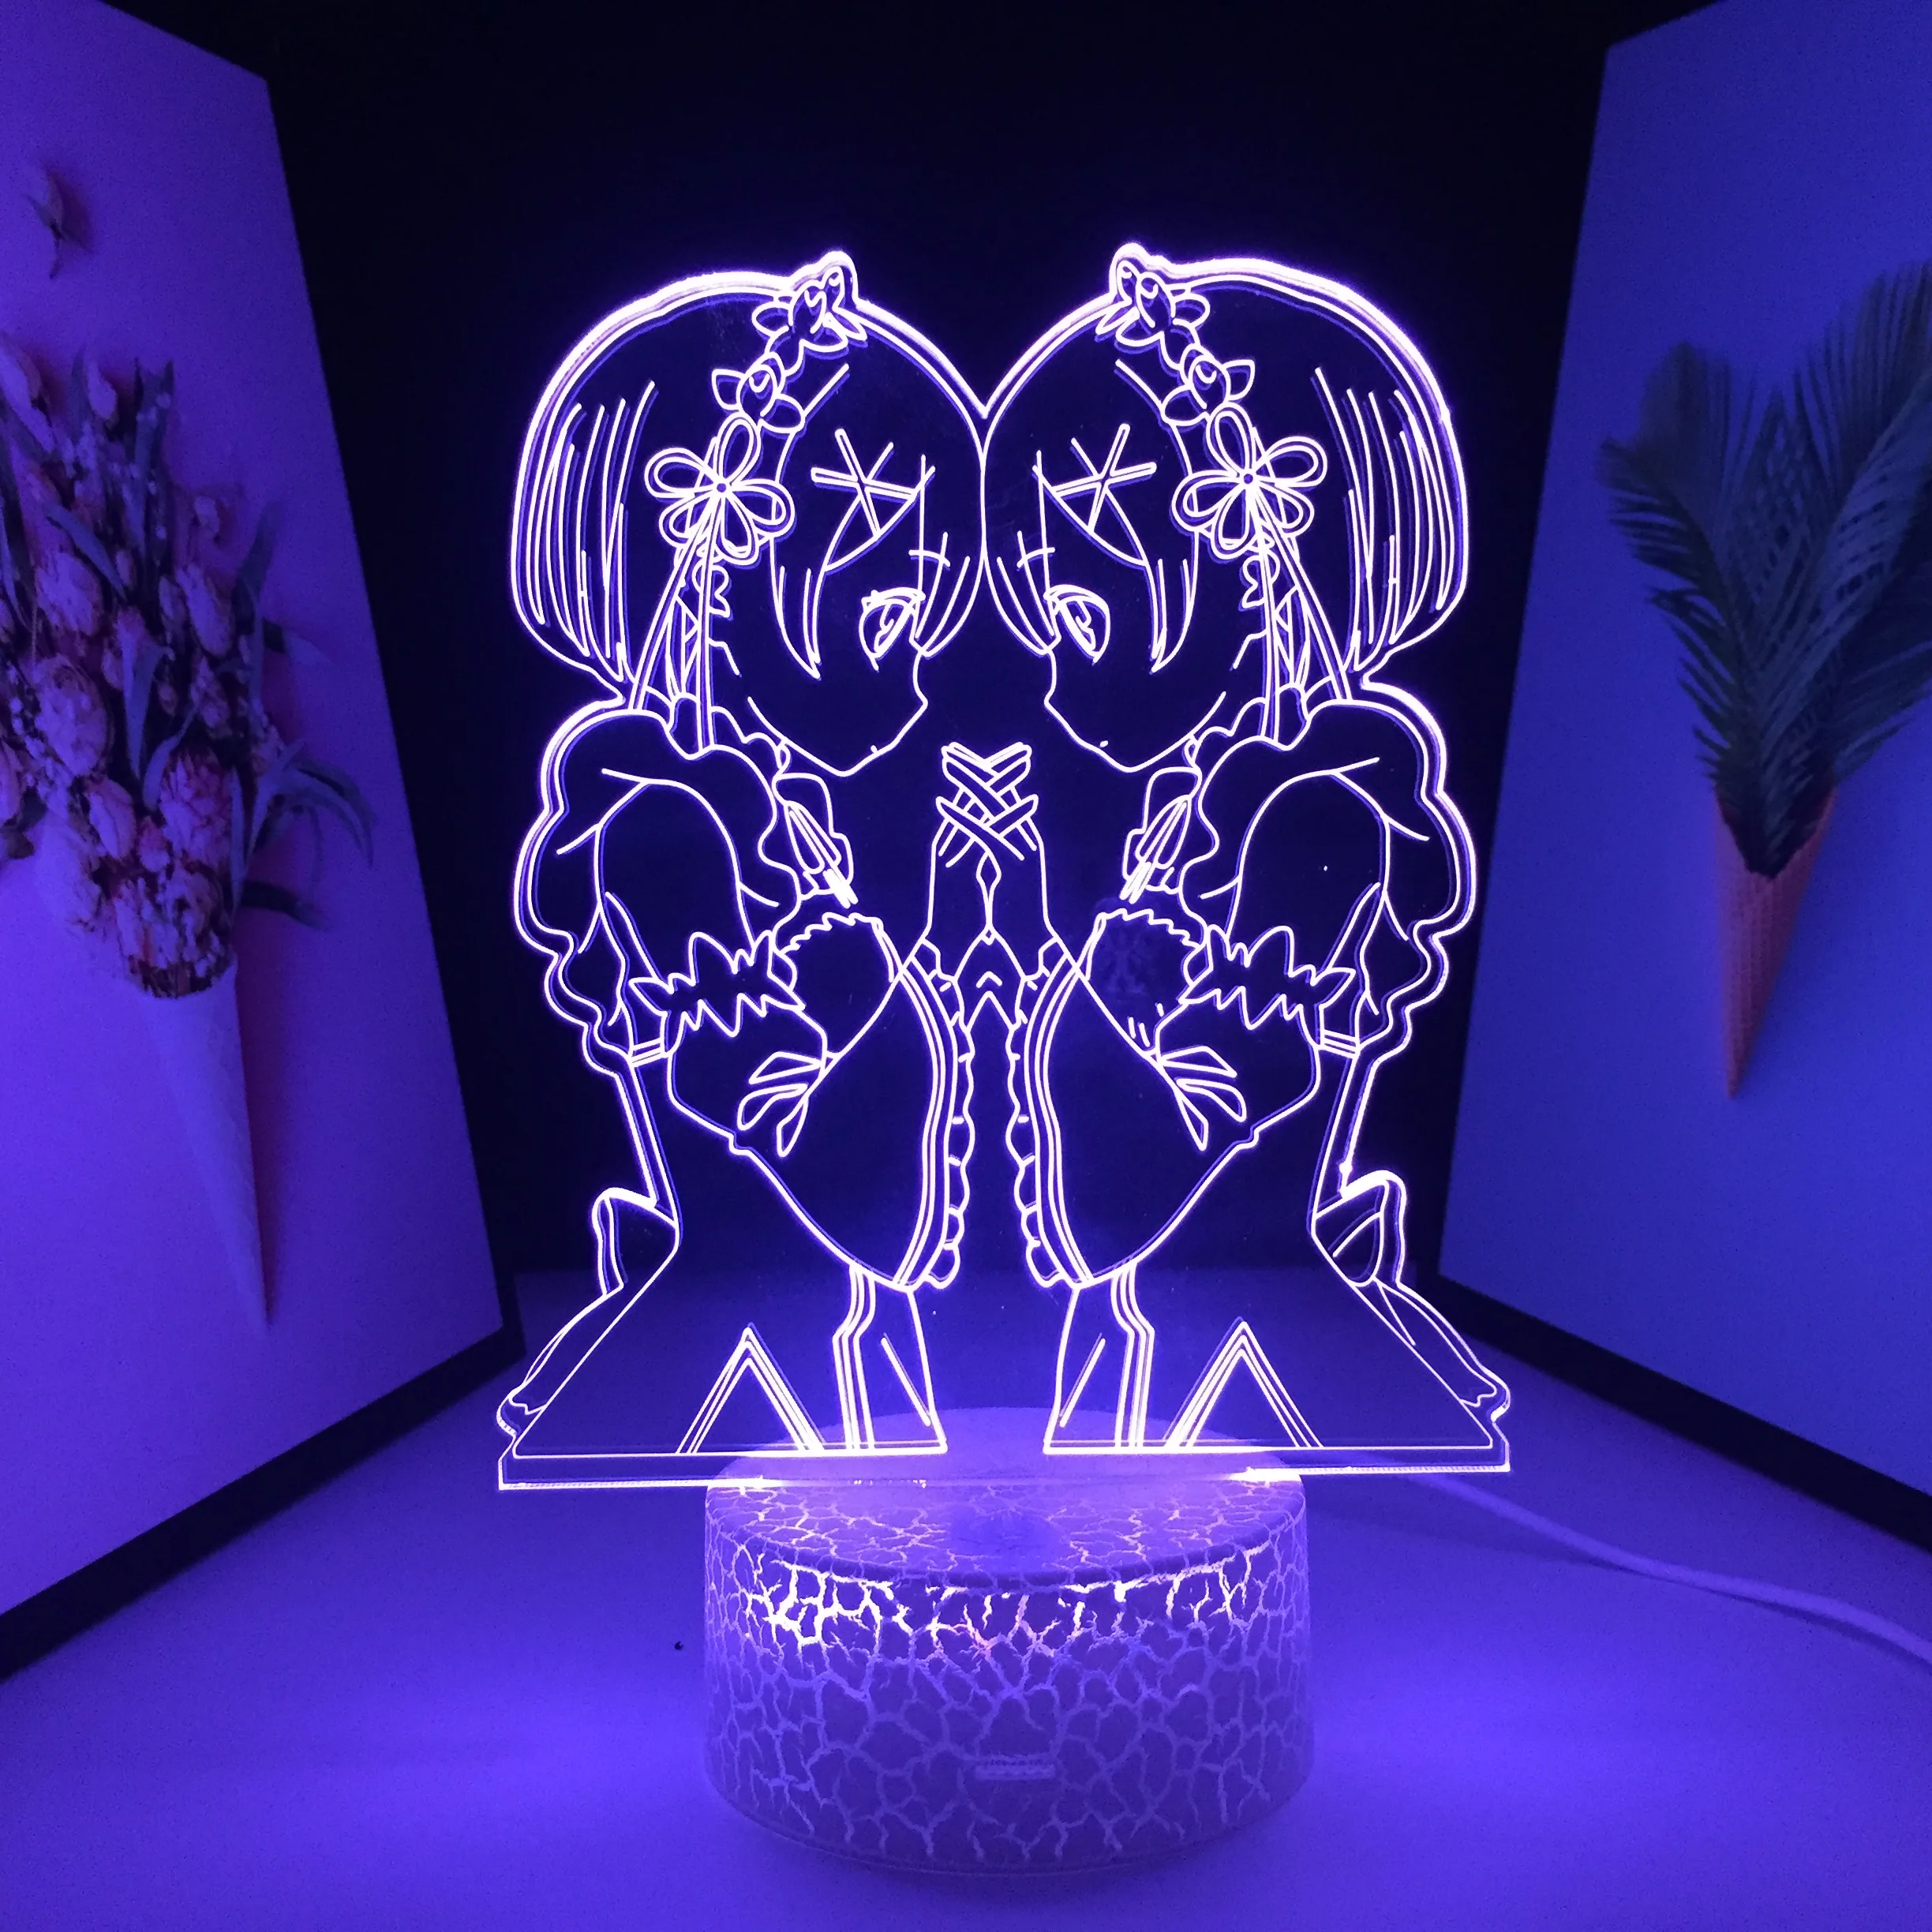 

Copy Hands Clasped Girl Anime Figure 3D LED Lamp White Cracked Base Visual Illusion USB Charging Neon Lights 7 Color Changes